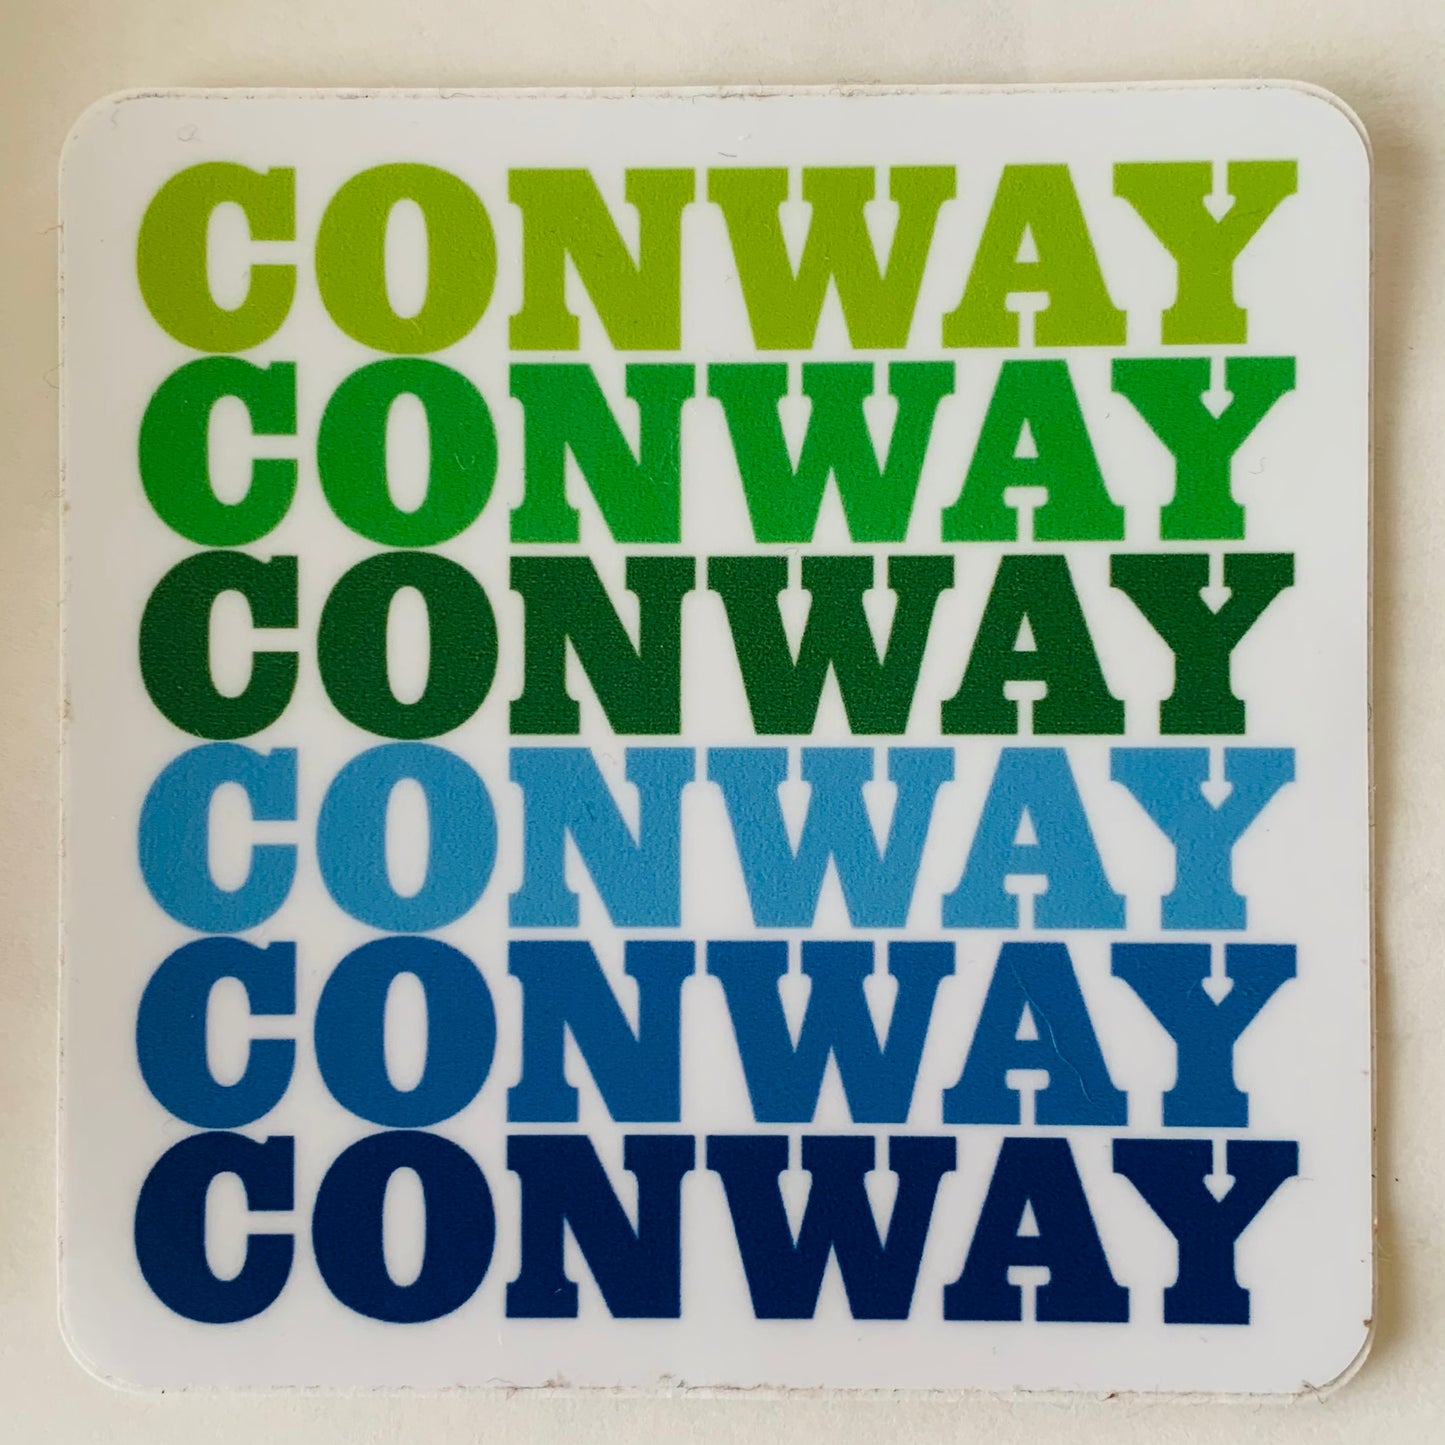 sticker with "conway" written six times with green to blue Ombre coloring.